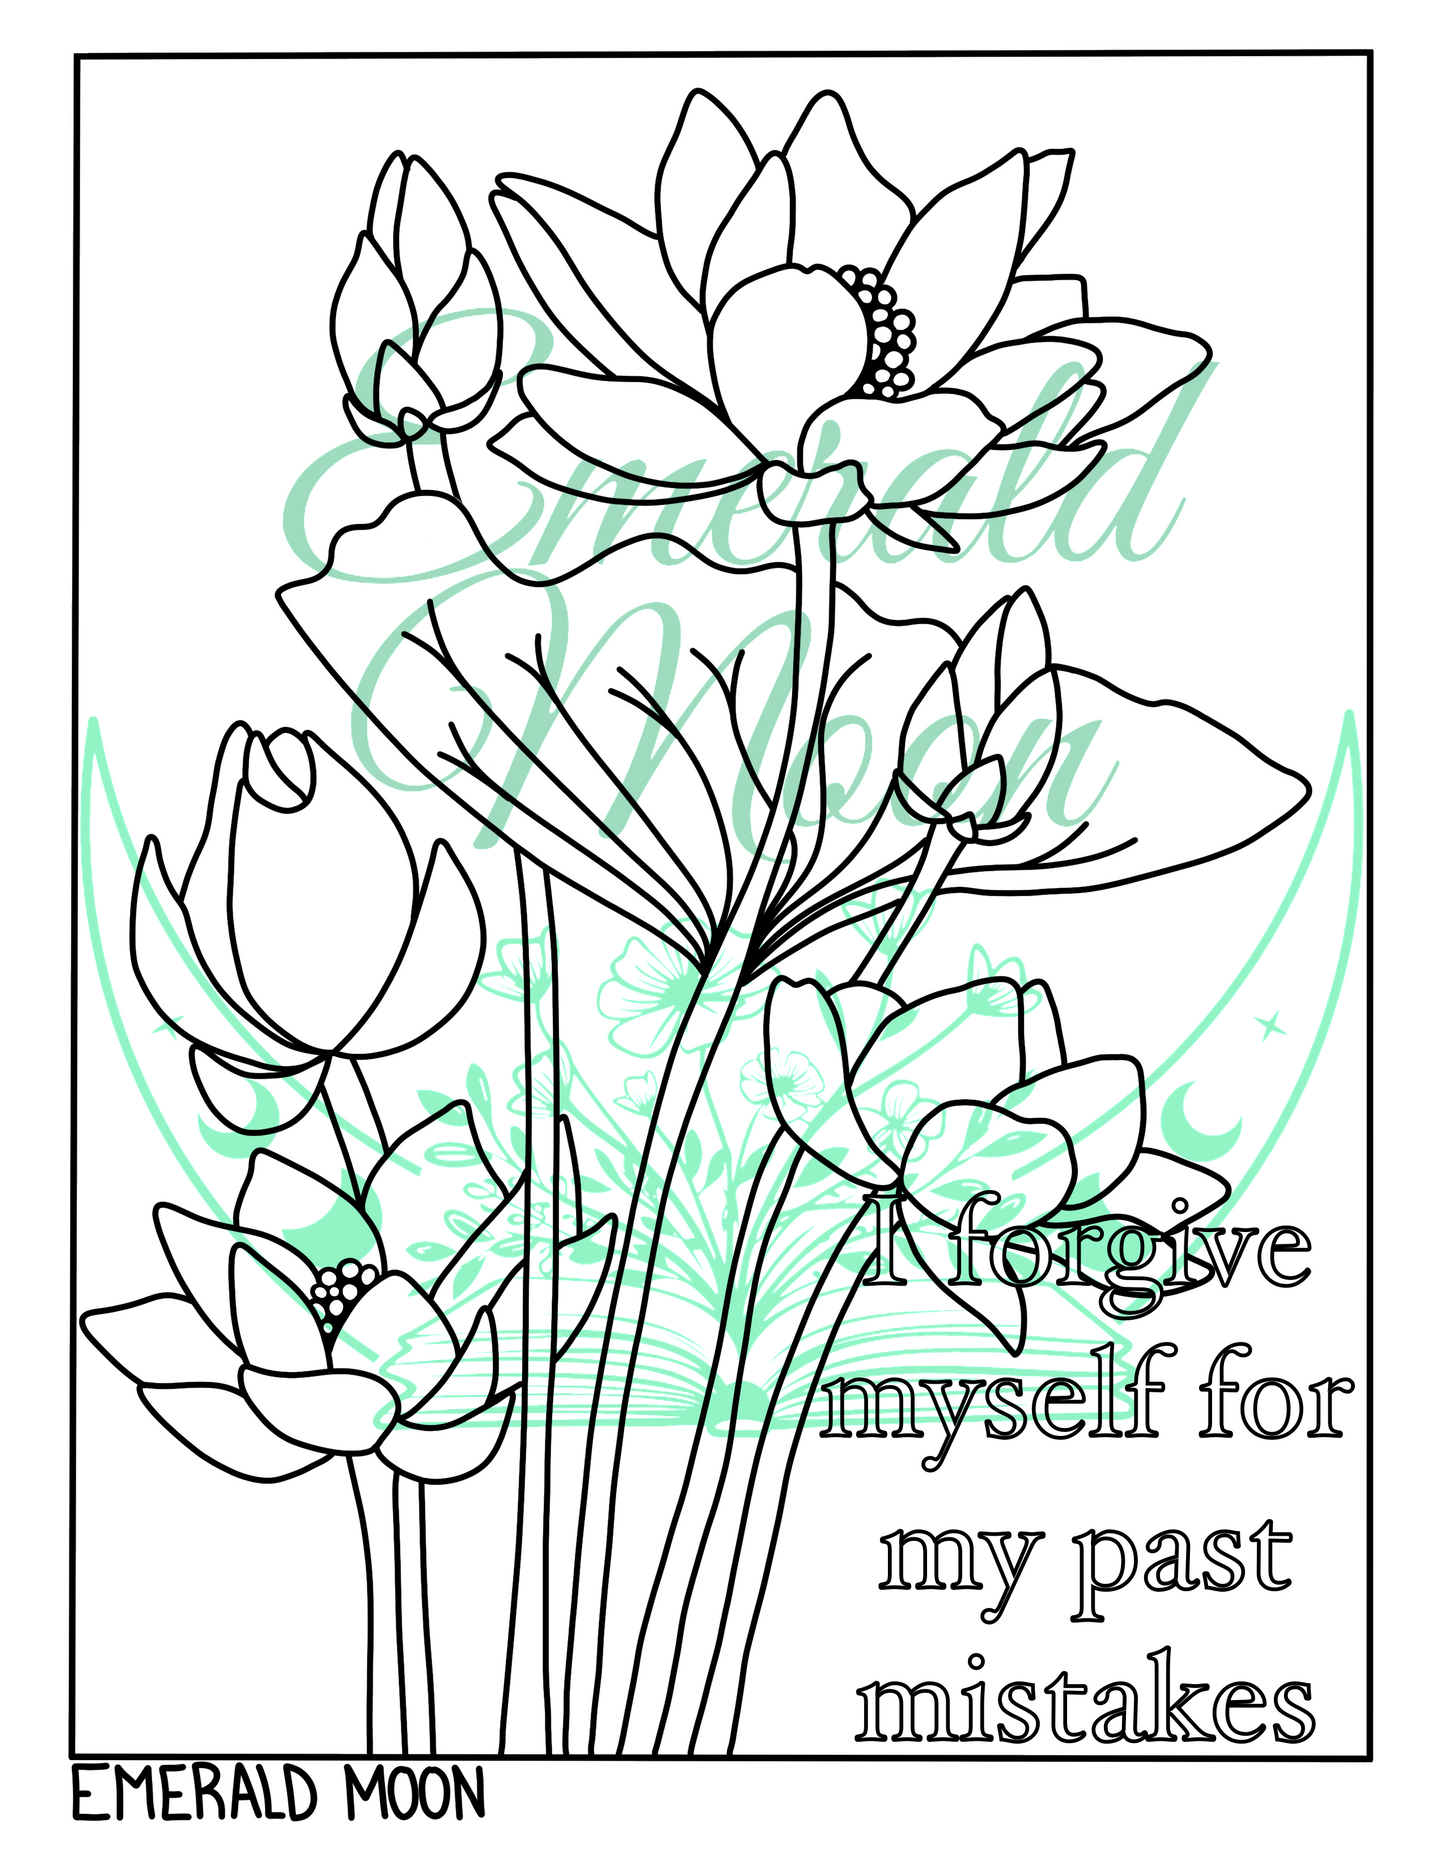 I Forgive Myself Coloring Page